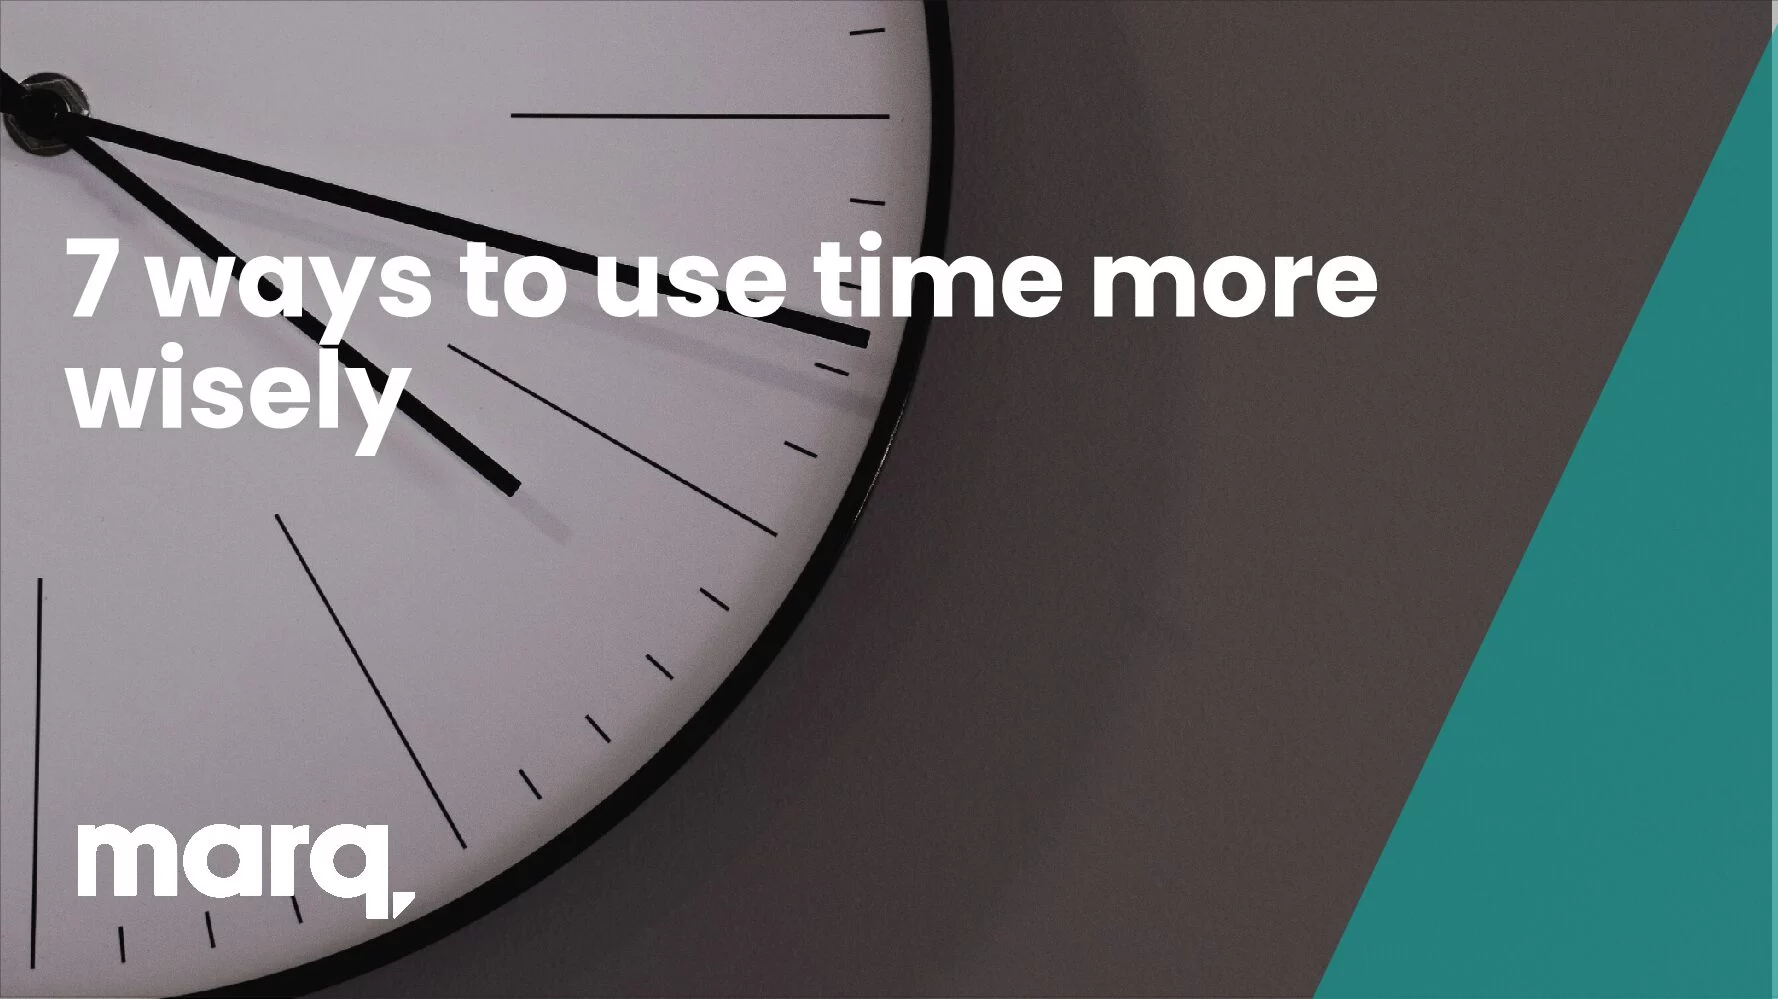 7 ways to use time more wisely